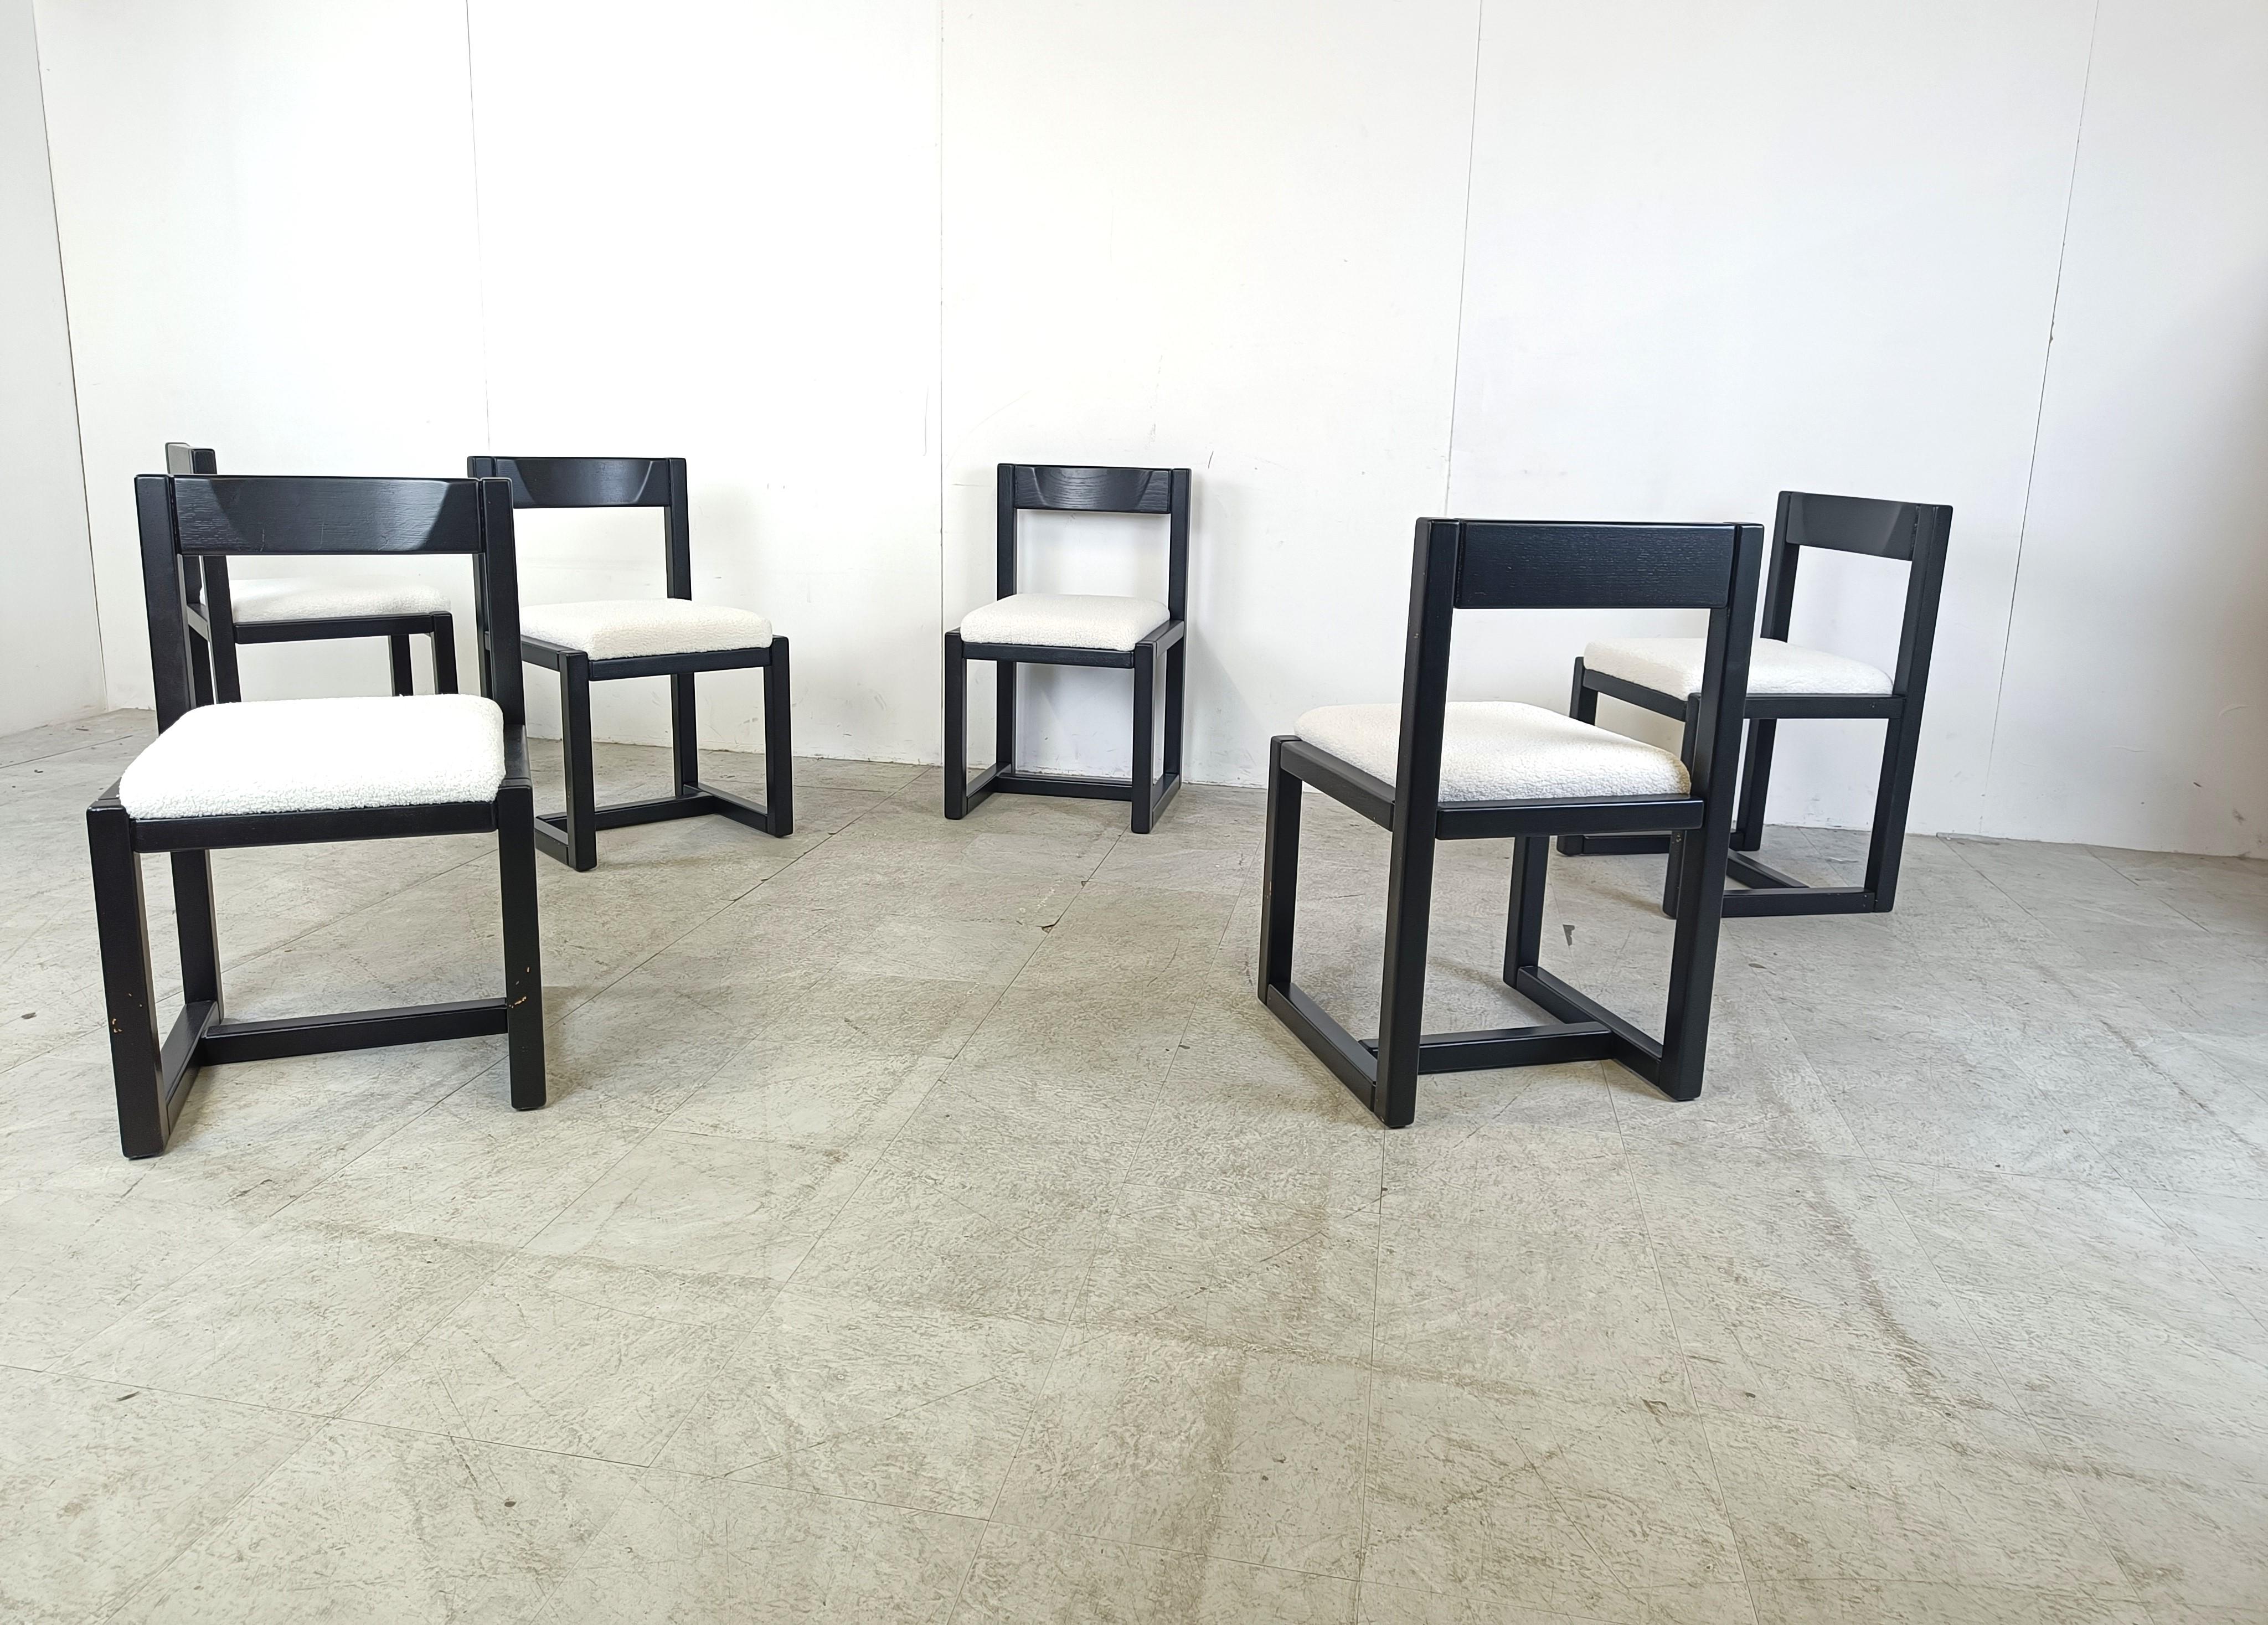 Late 20th Century Vintage brutalist dining chairs, set of 6 - 1970s For Sale